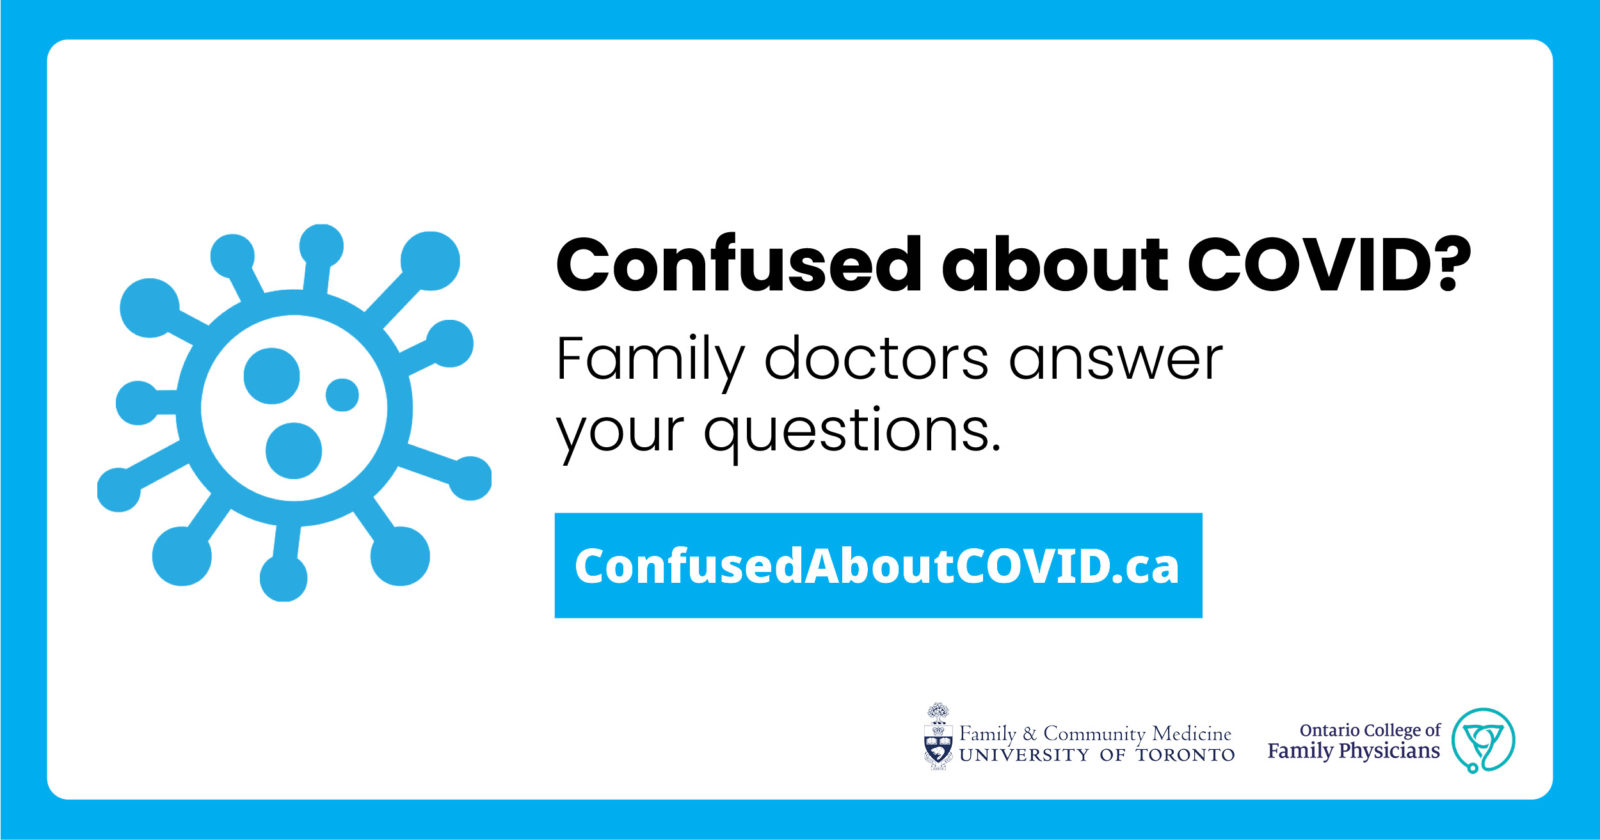 Cutting through the COVID confusion